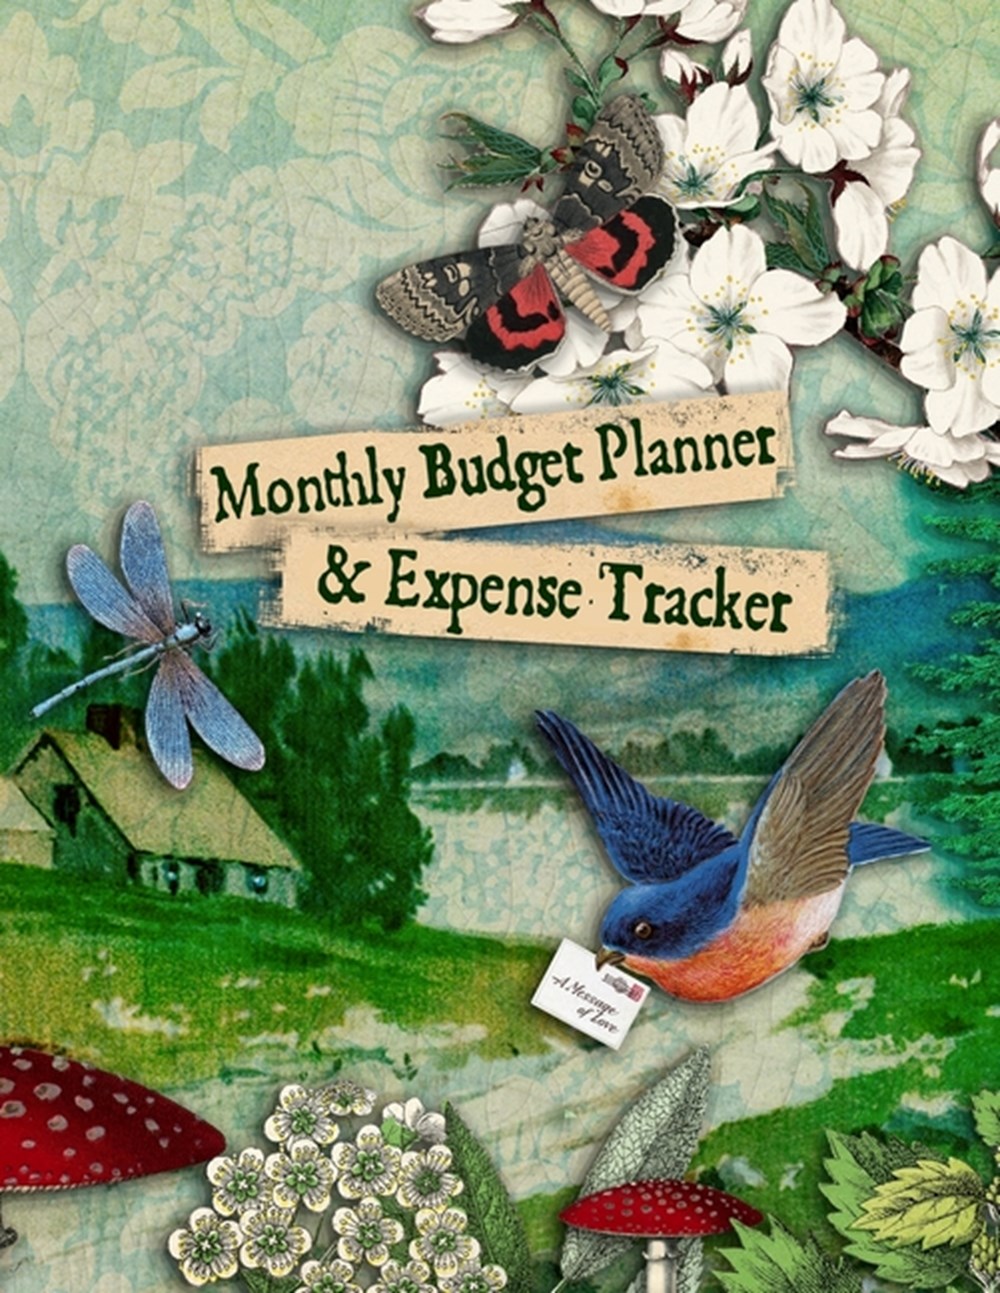 Monthly Budget Planner & Expense Tracker Financial Log Book Organiser, Undated Household Finances, S